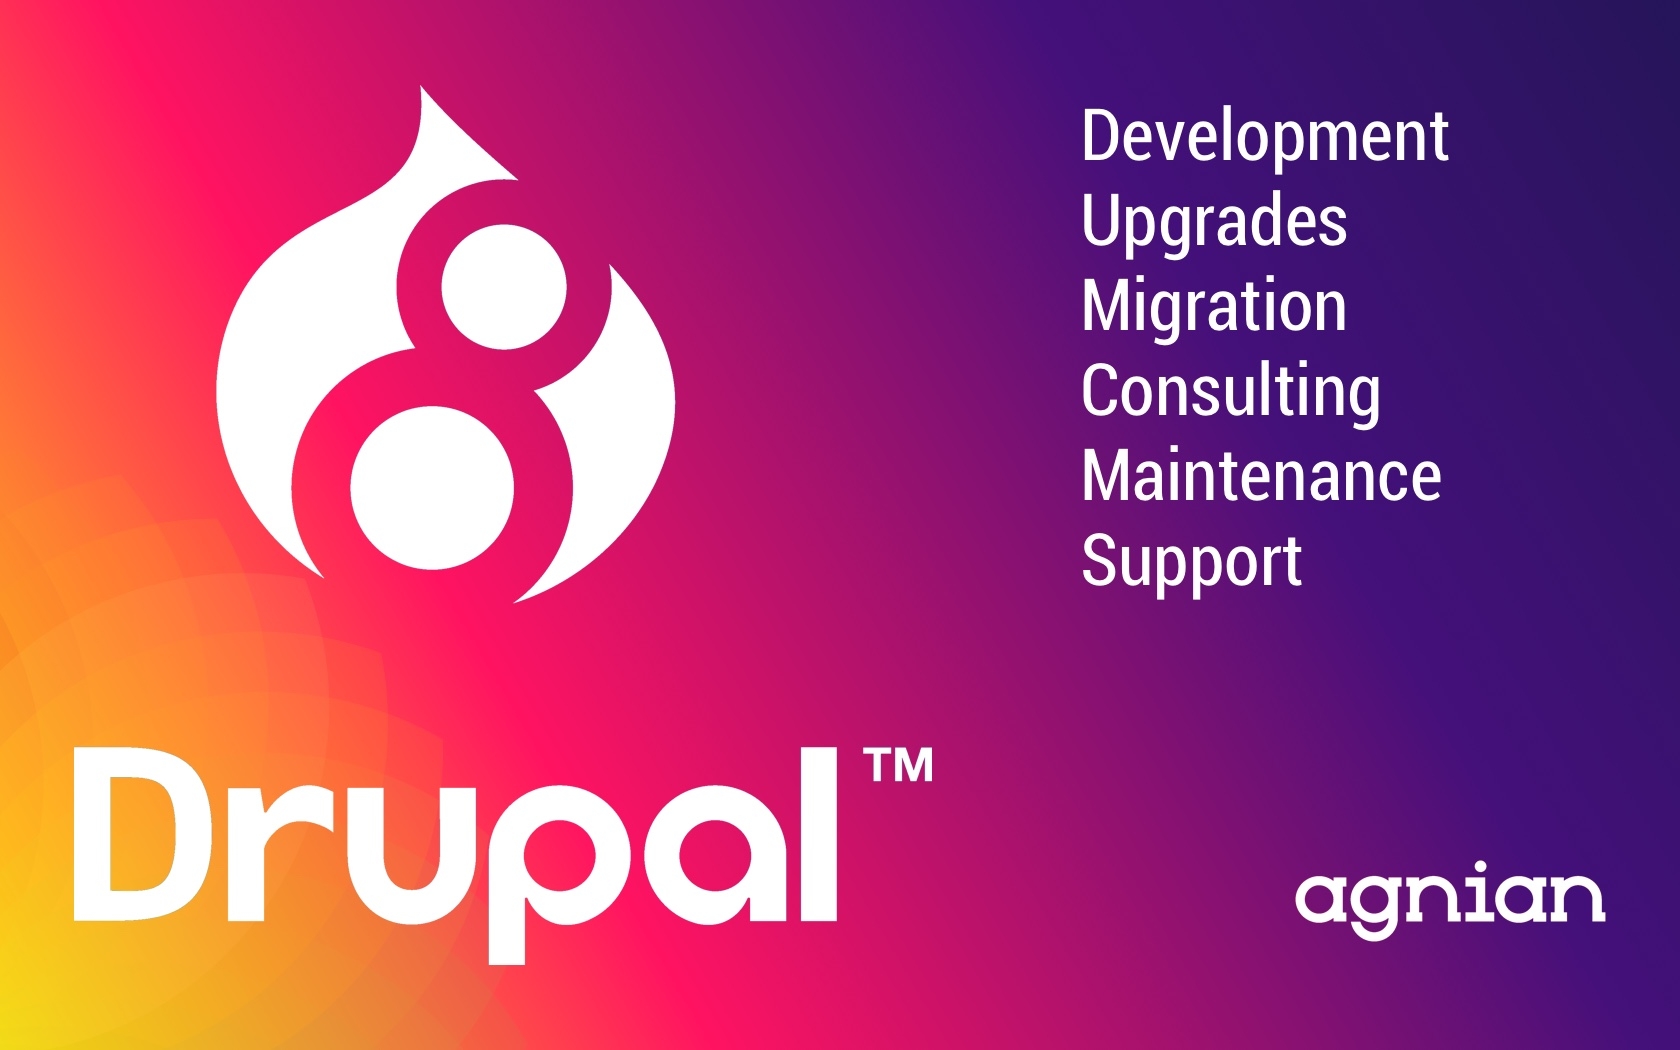 Agnian Drupal 8 Development, Consulting and Maintenance